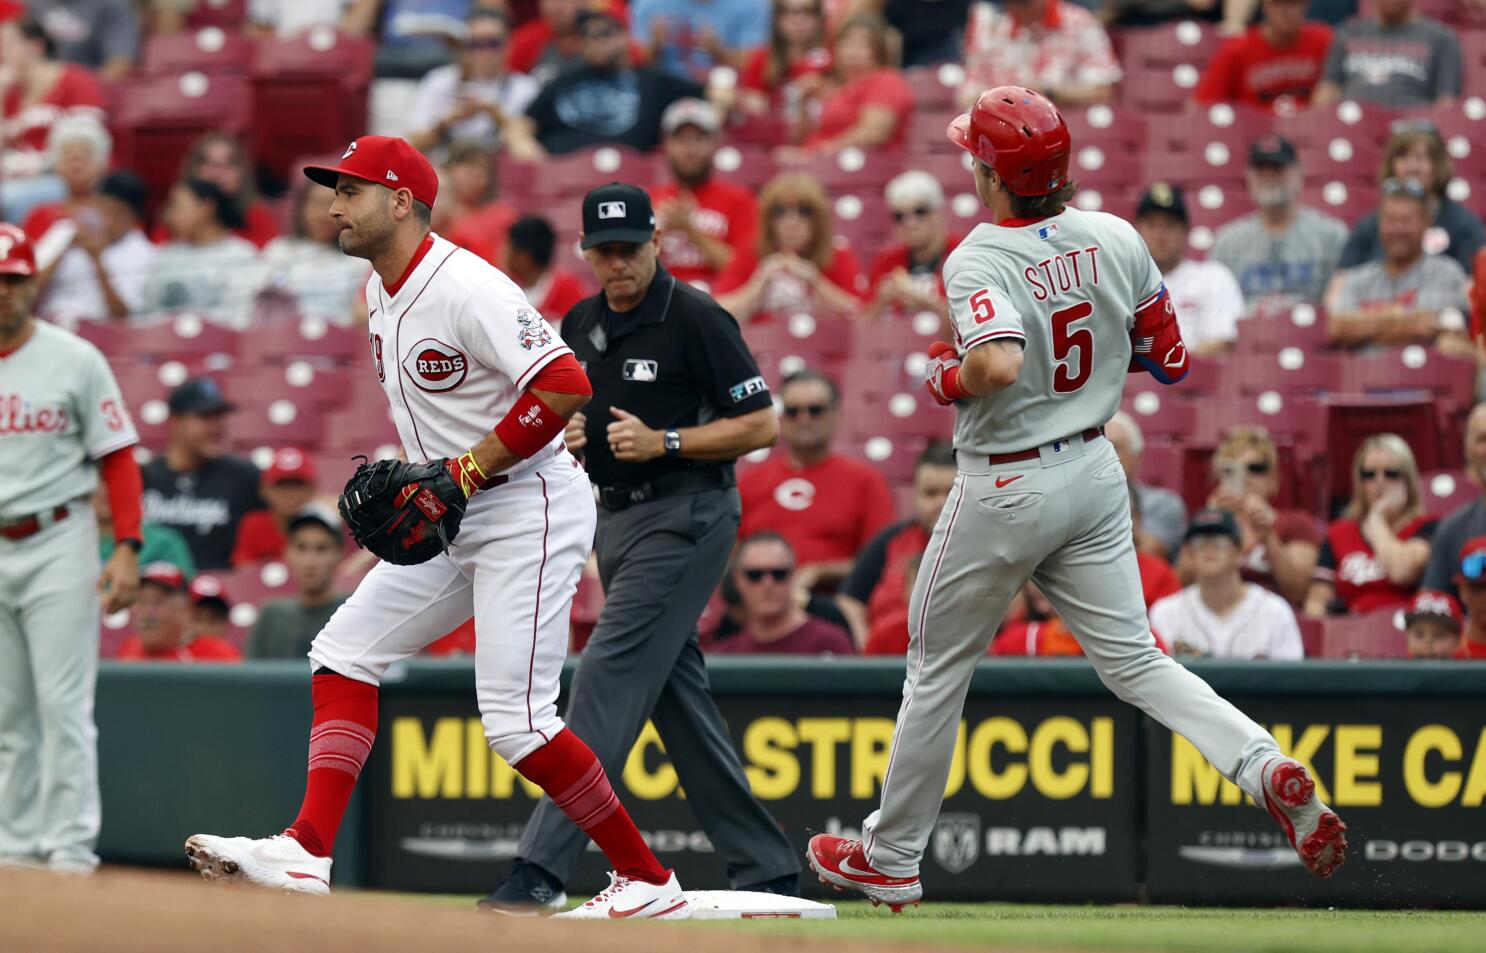 Joey Votto returns to Reds lineup for first game since August 2022